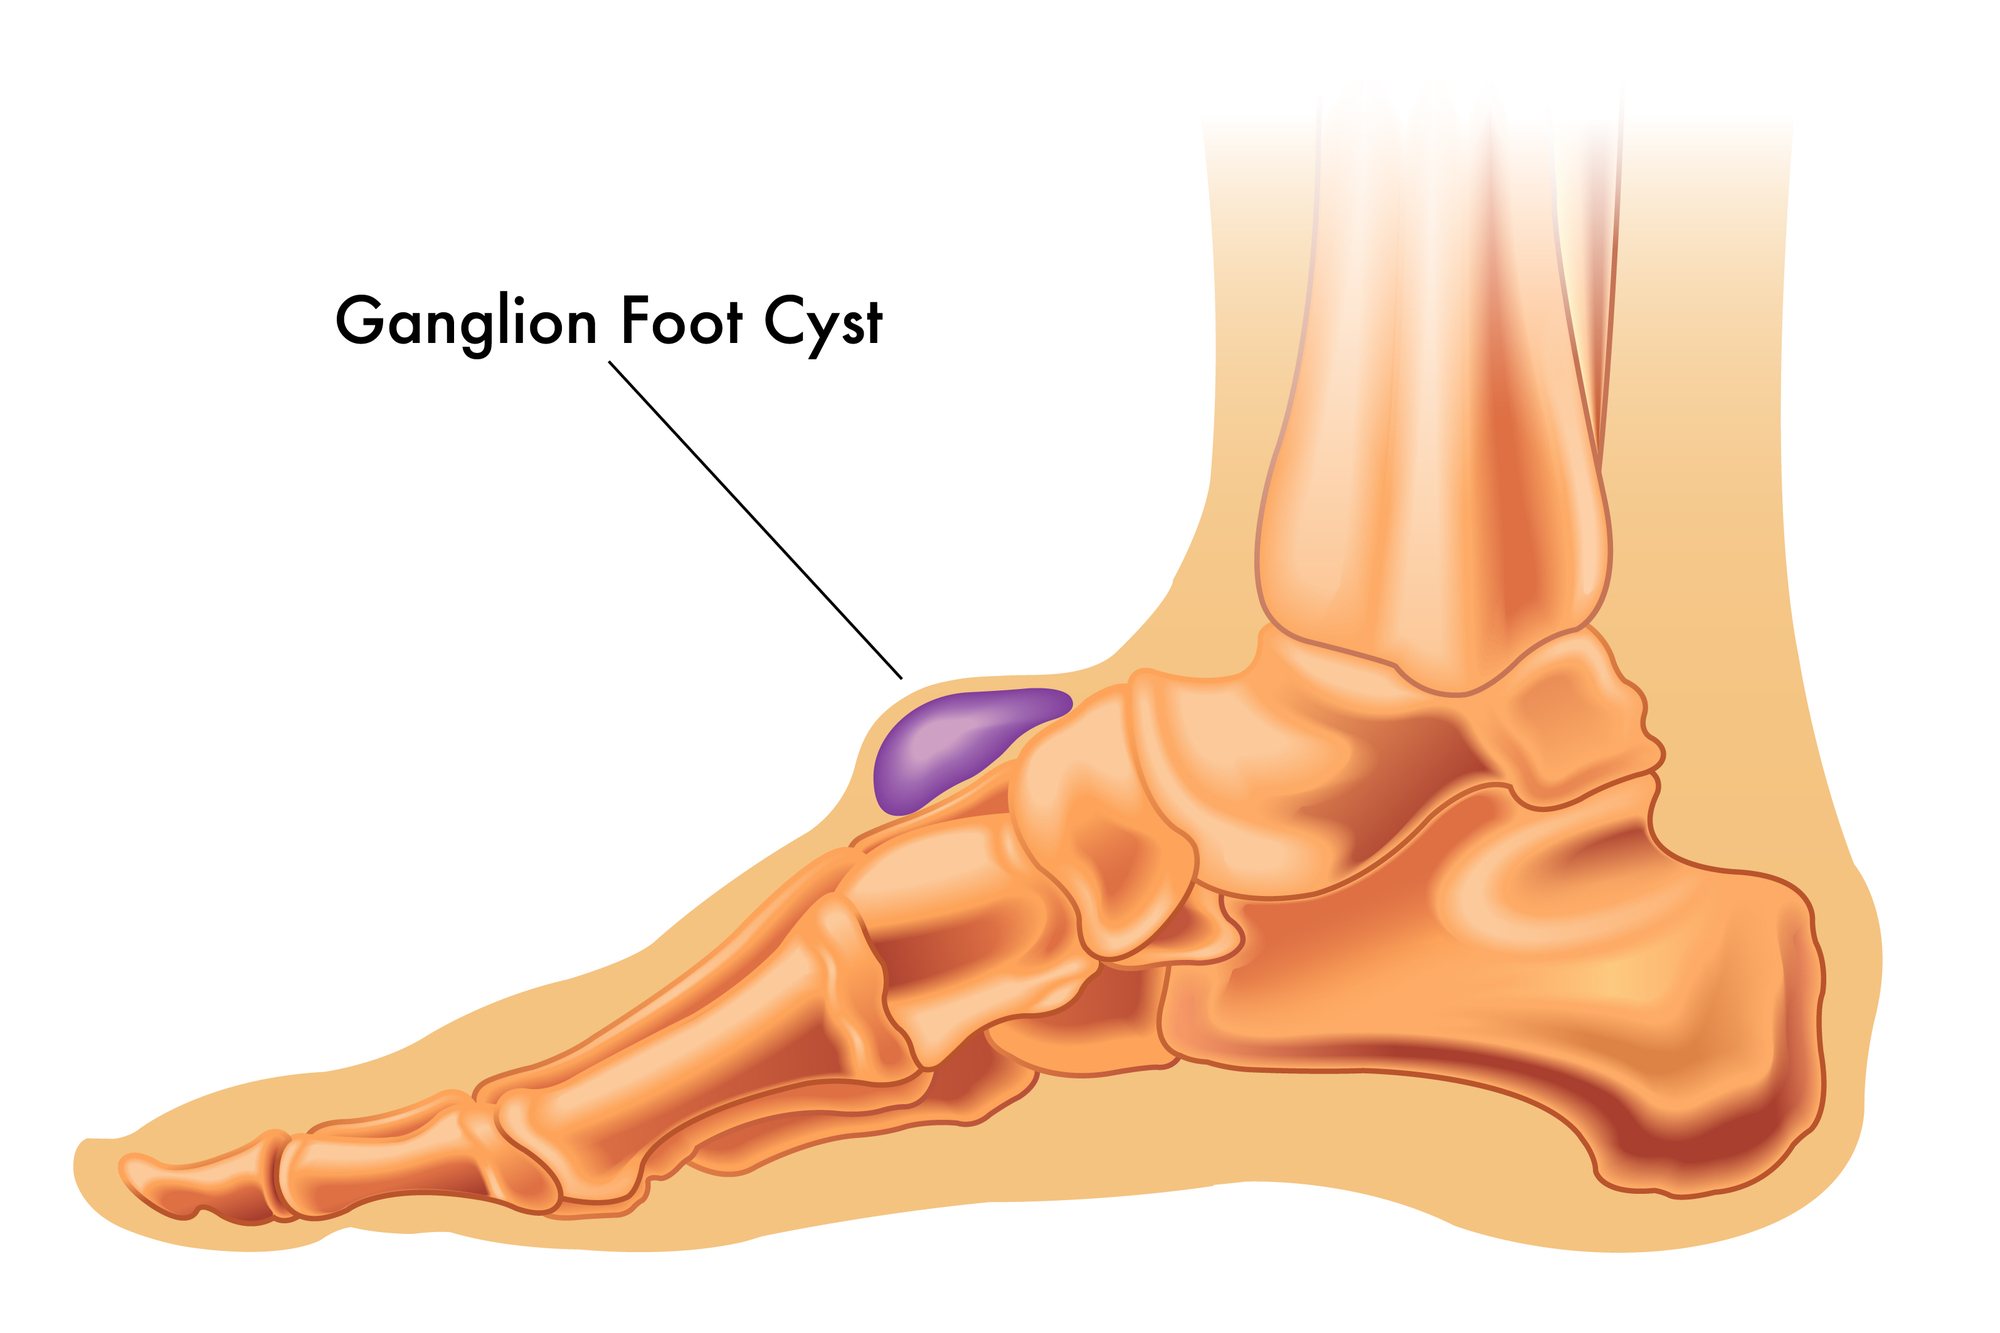 Illustration of a ganglion cyst on the foot